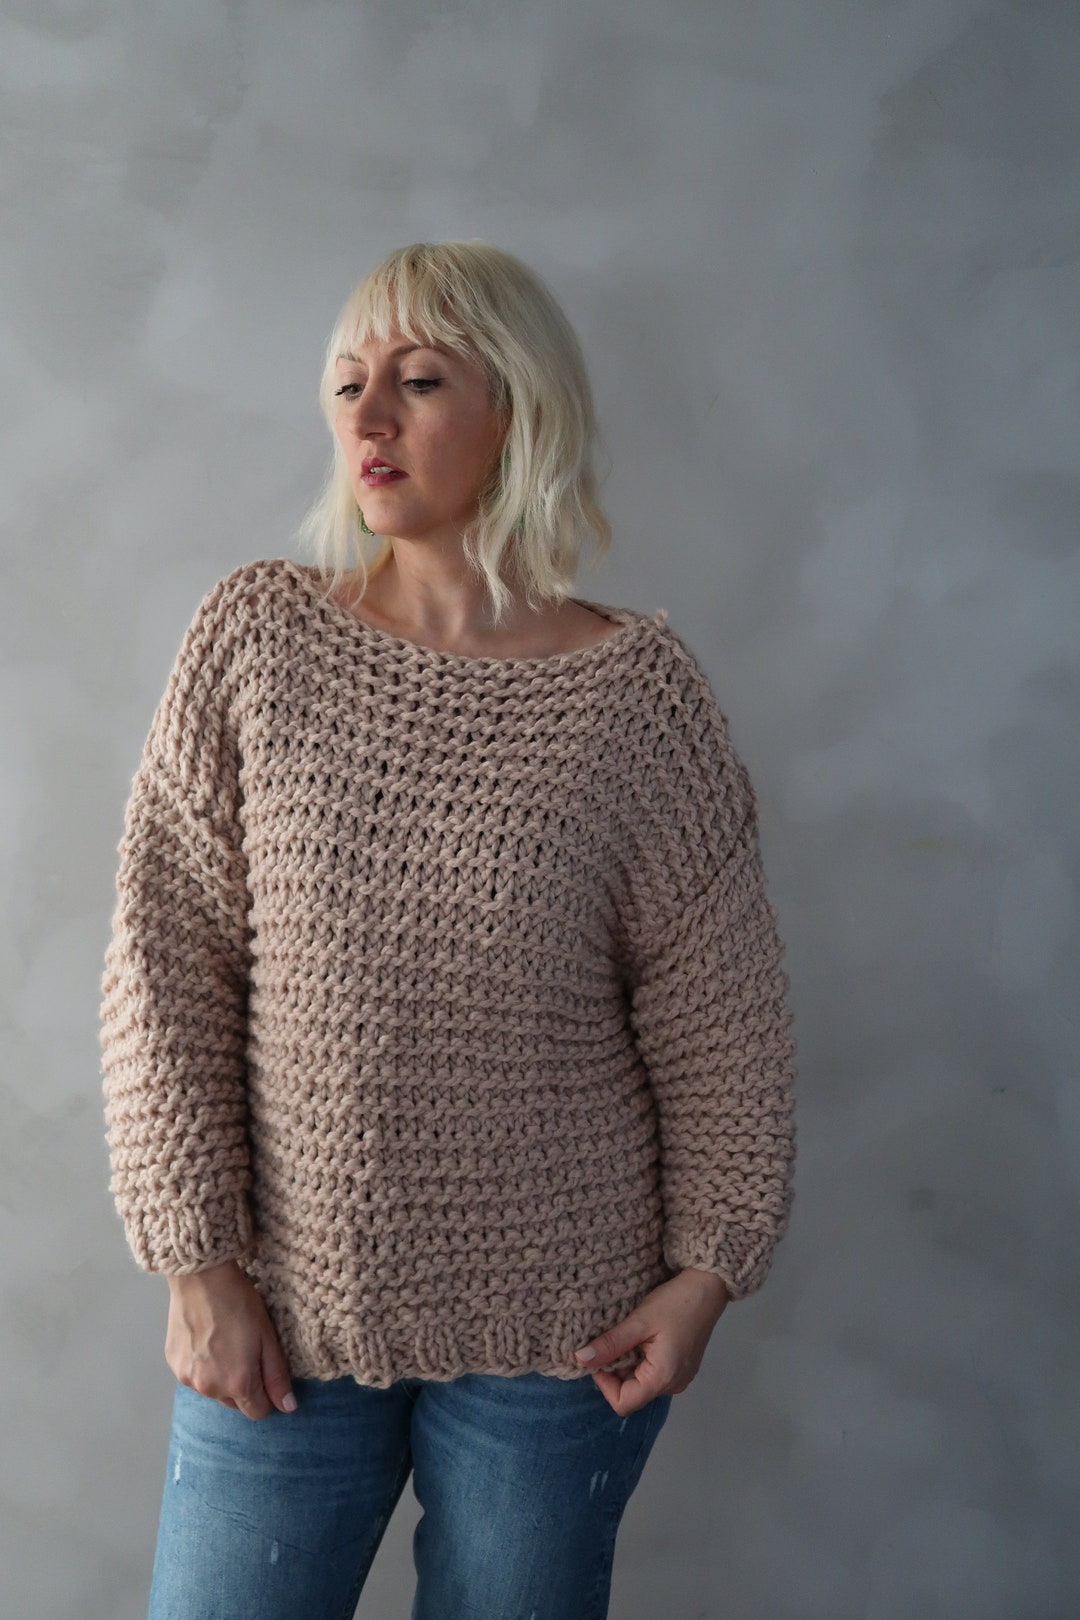 Chunky Sweater / Chunky Knit Sweater / Very Thick Sweater / - Etsy